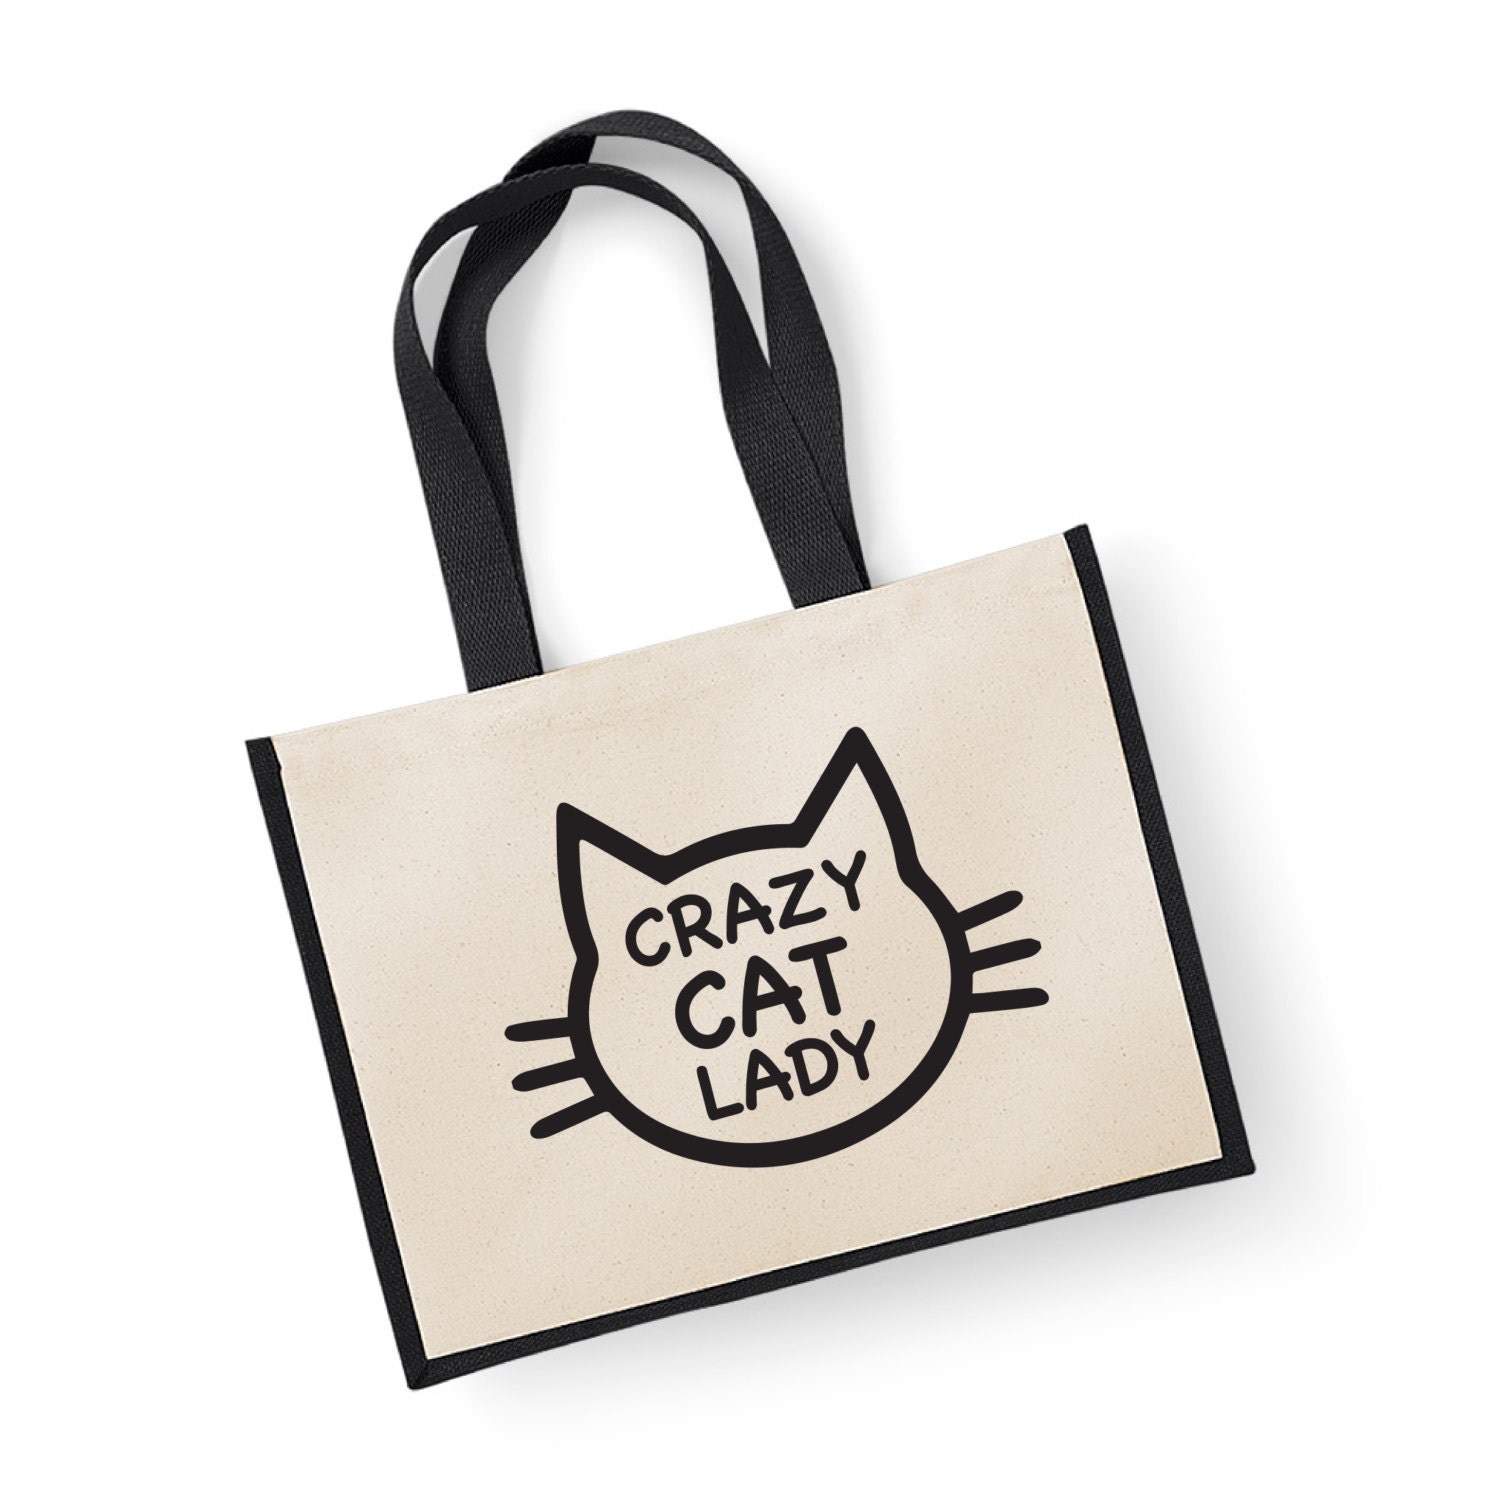 Riverside Cat Tote Bag|Customized Name Canvas Bag|Personalized Text Handbag|Special Anniversary Gift|Customized Canvas Shoulder Bag